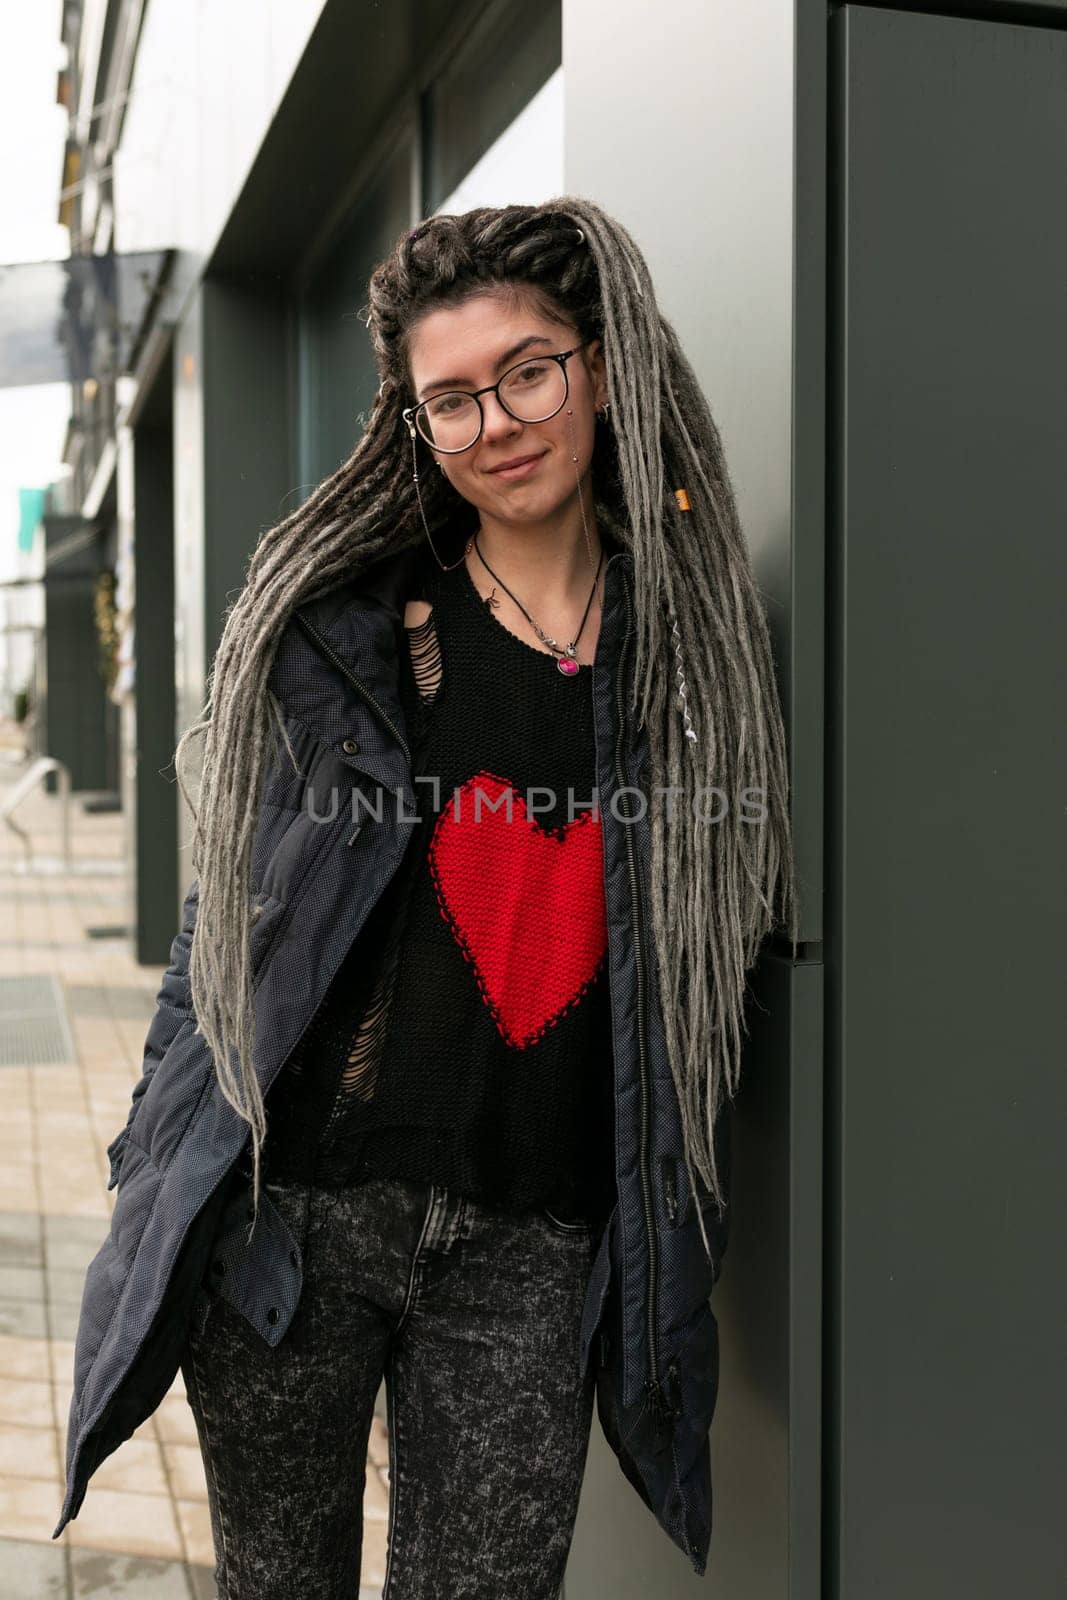 Photo on the street, young pretty informal woman with dreadlocks hairstyle smiling sweetly.